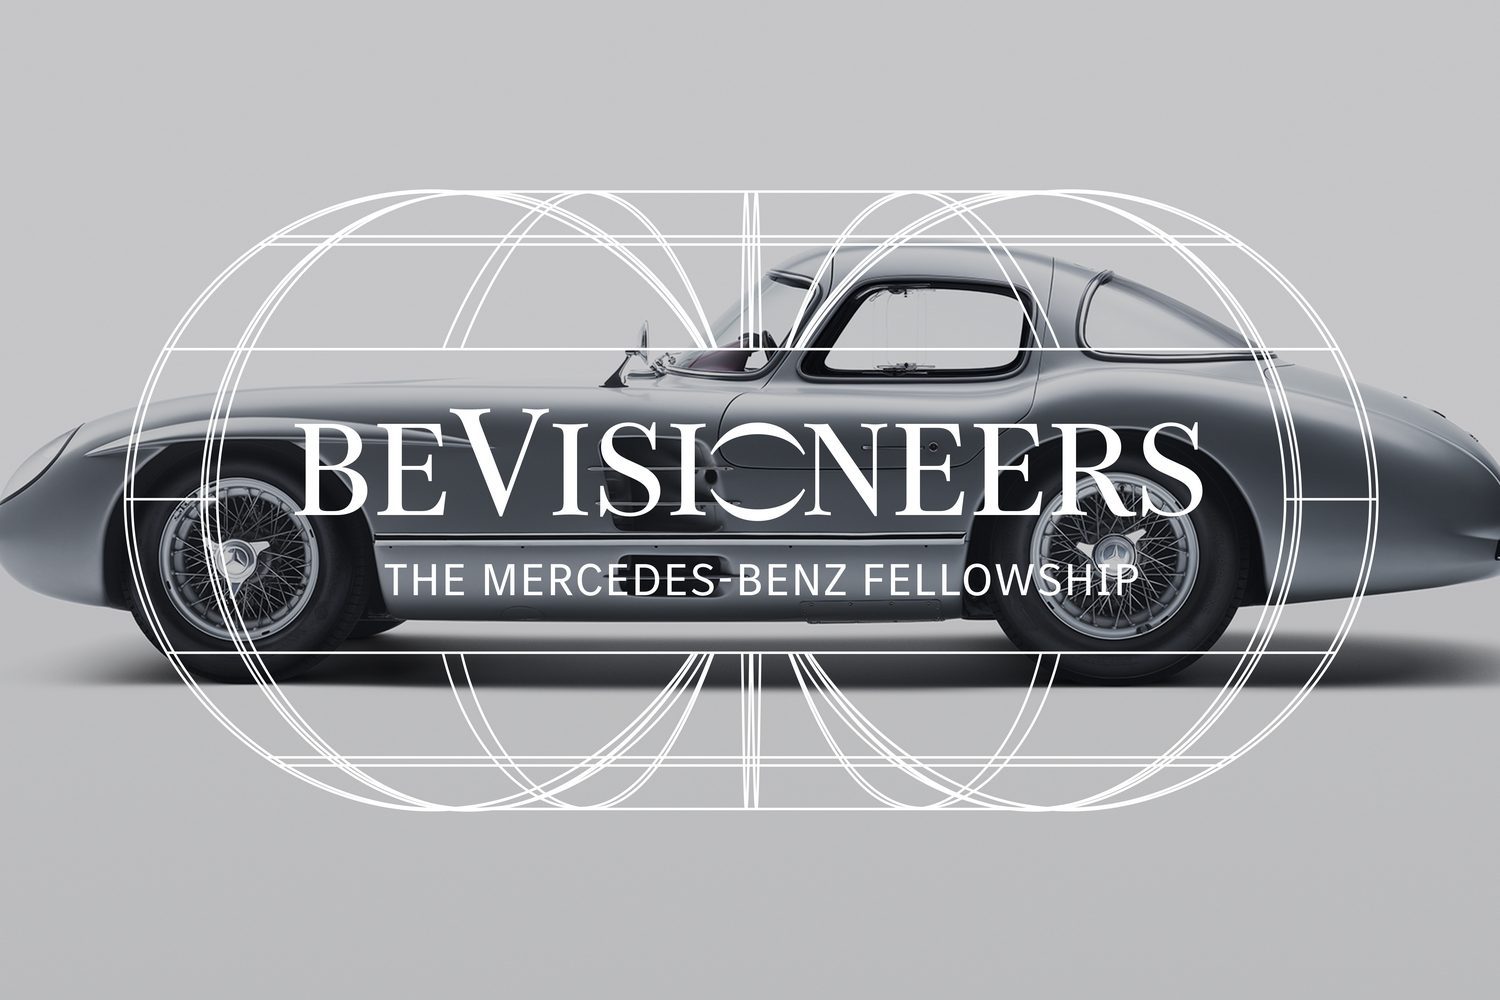 Car News | Mercedes starts beVisioneers charity | CompleteCar.ie